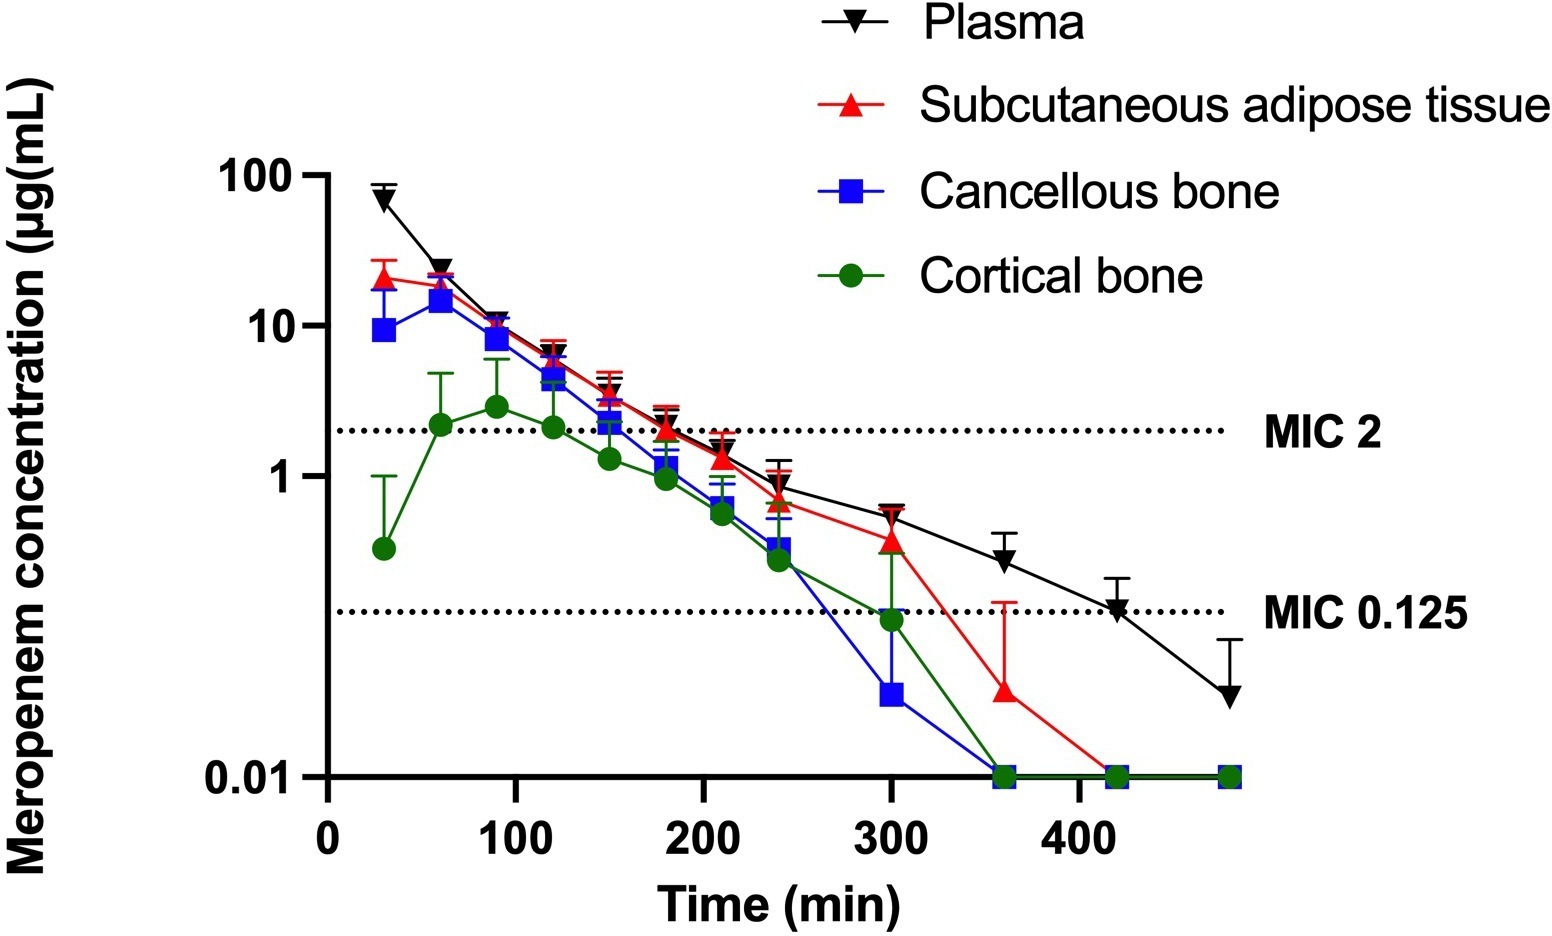 Fig. 2 
          Mean concentration time profiles for meropenem in plasma, subcutaneous adipose tissue, cancellous bone, and cortical bone. Minimal inhibitory concentrations (MICs) of 0.125 and 2 µg/ml are indicated by the horizontal dotted lines. Y-axis is log-scaled. The error bars represent upper 95% confidence intervals.
        